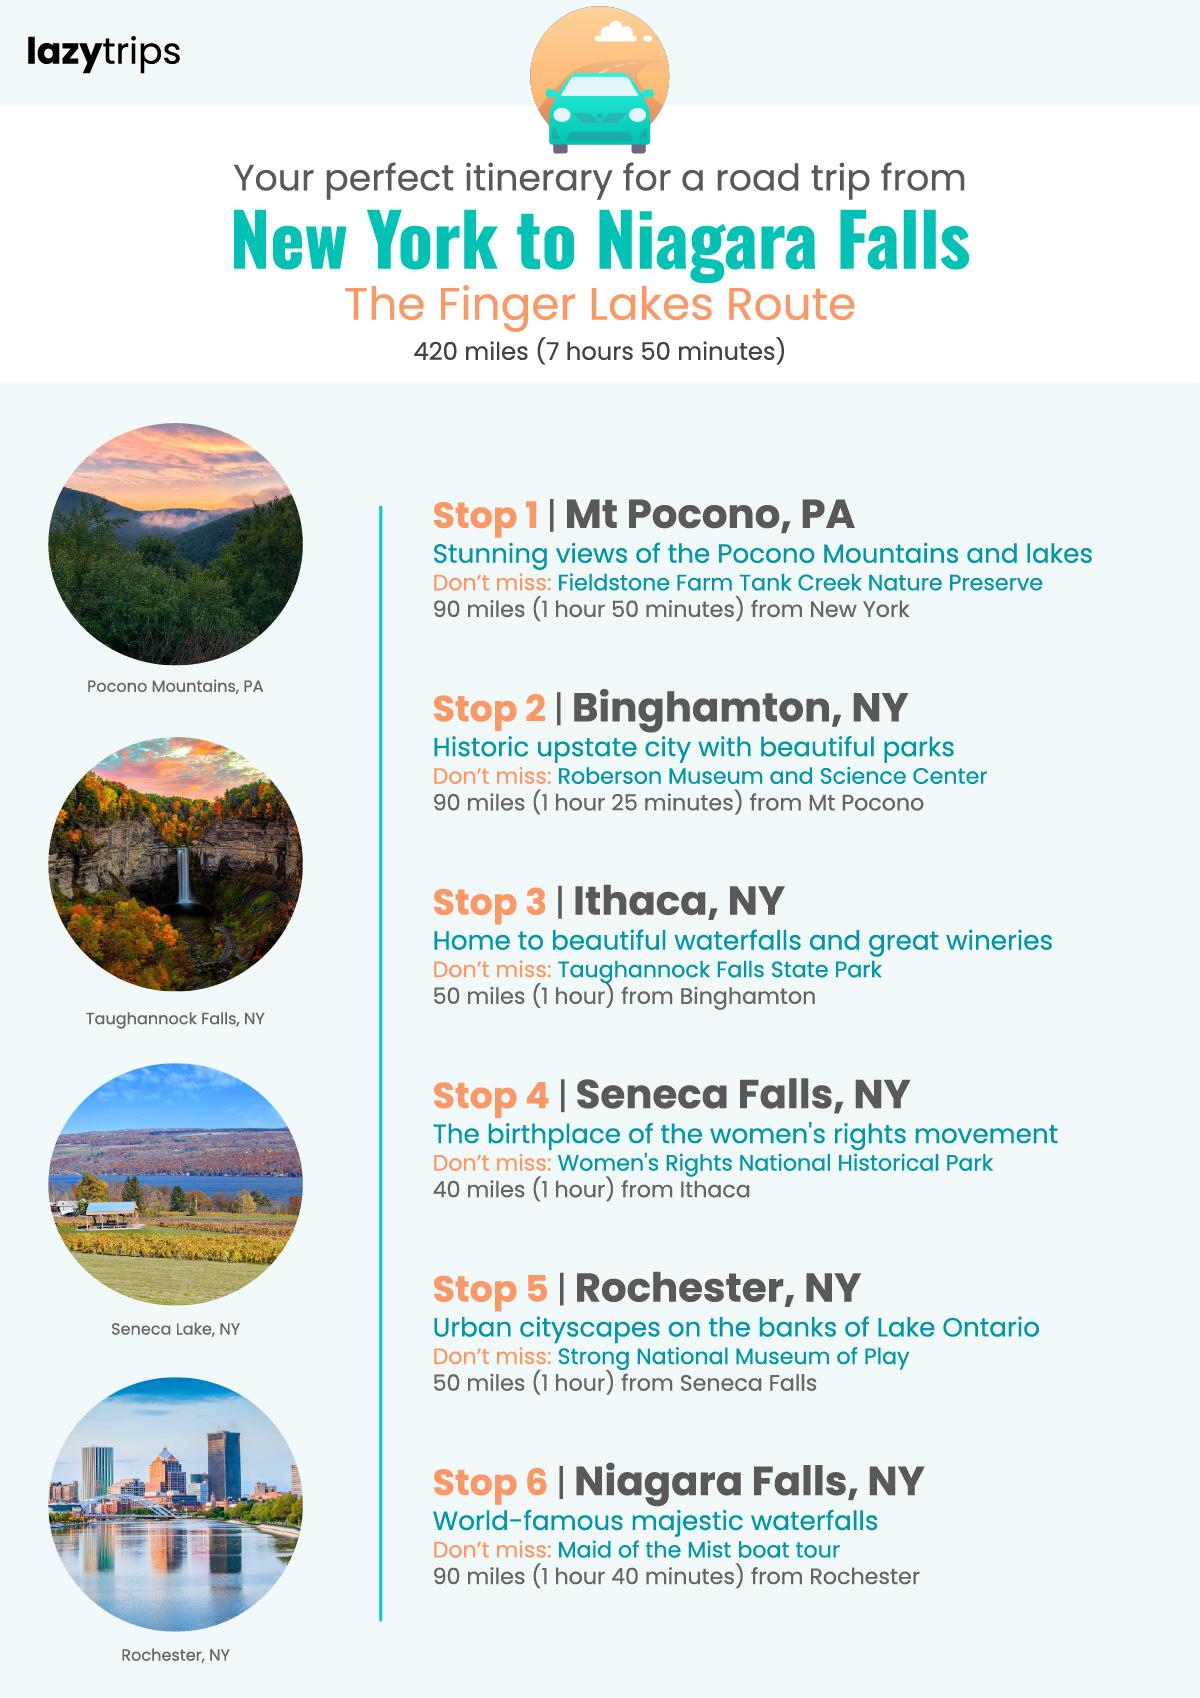 Itinerary for a road trip from New York to Niagara Falls, stopping in Mt Pocono, Binghamton, Ithaca, Seneca Falls, Rochester and Niaraga Falls